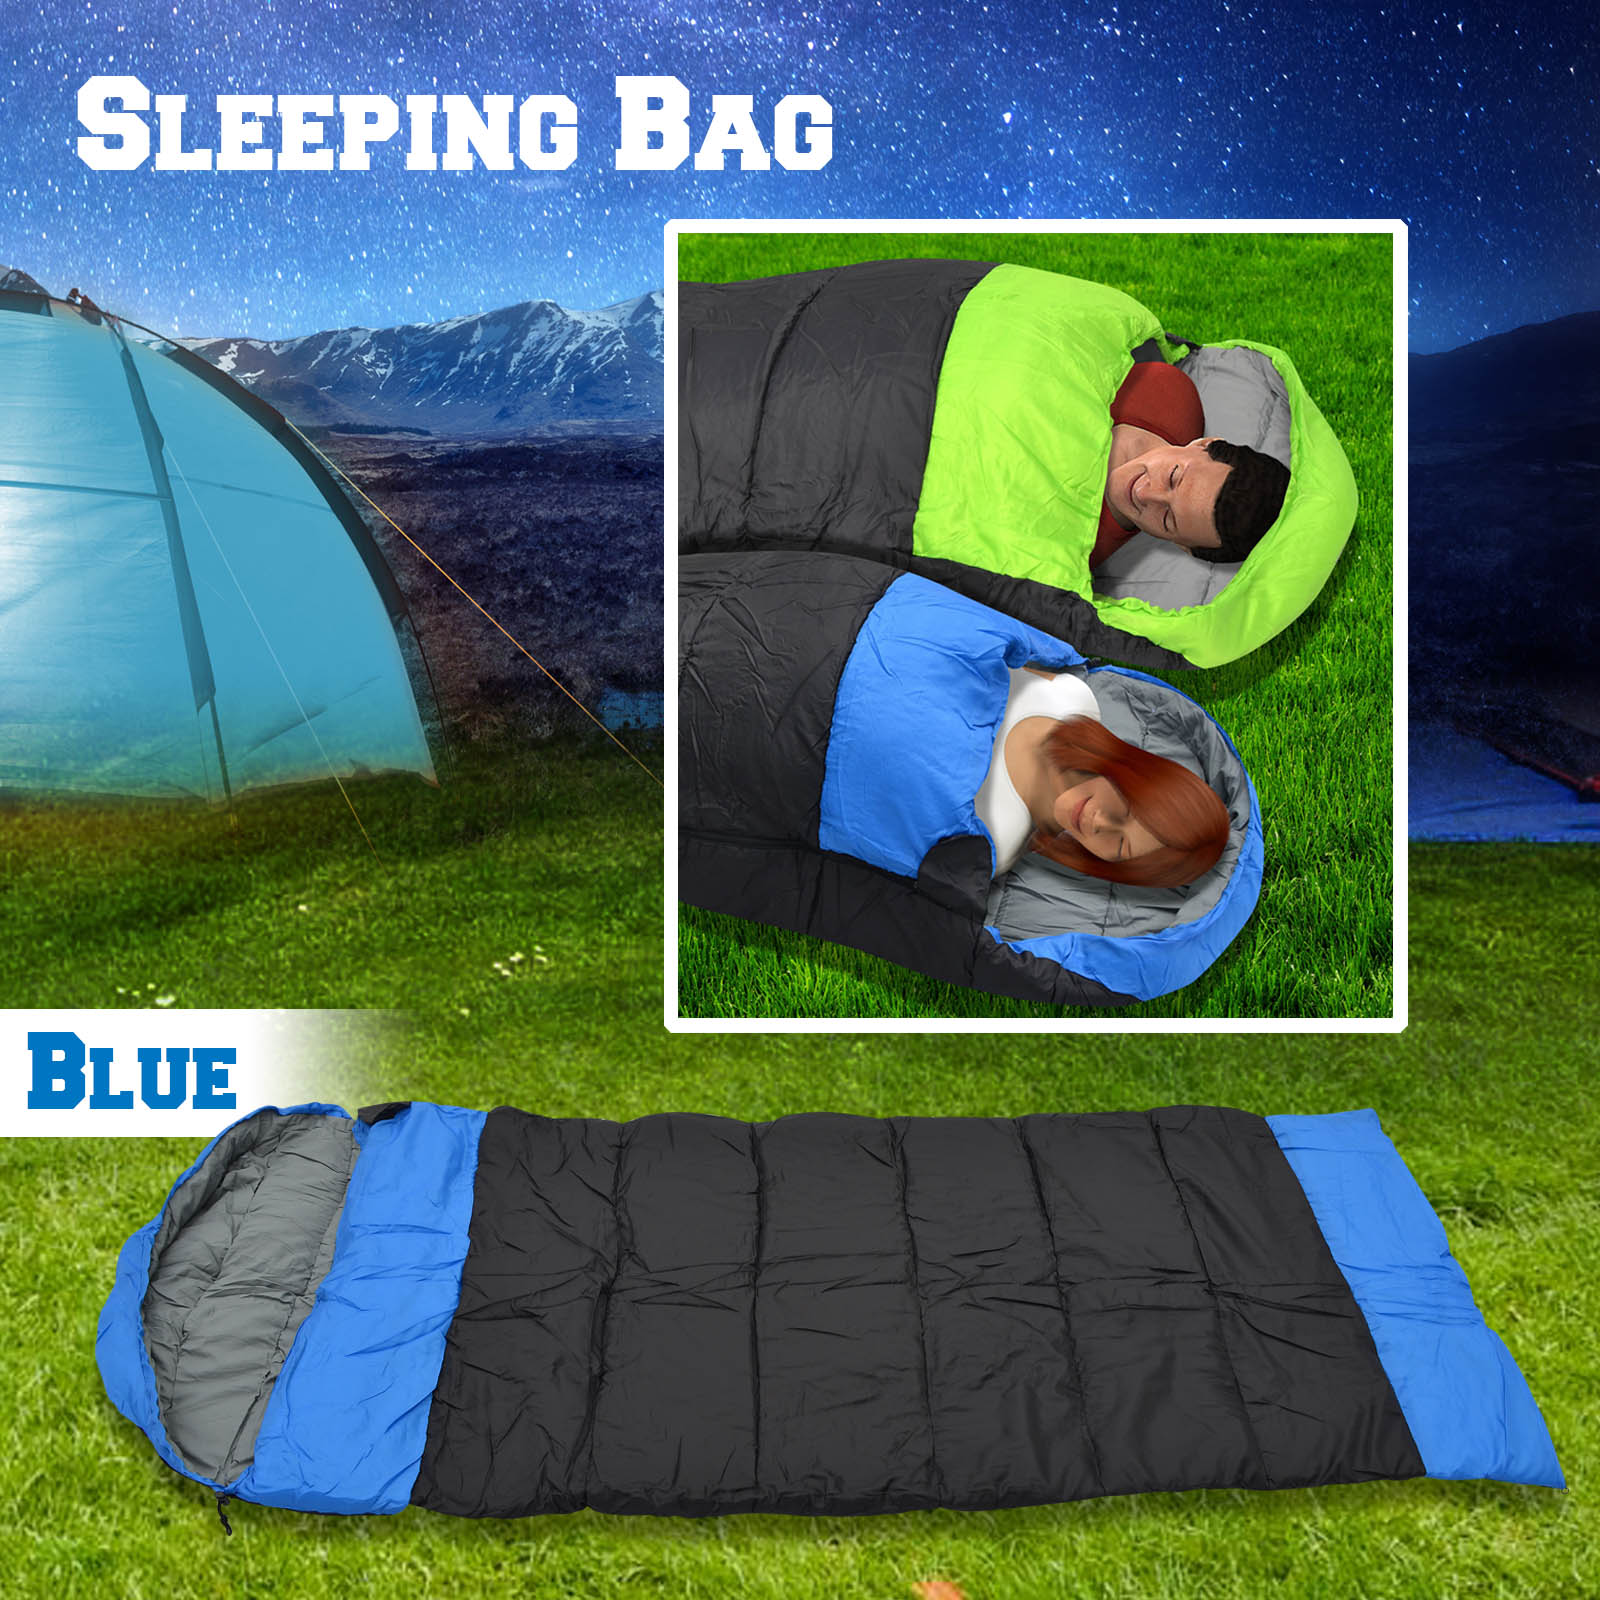 Sunrise Hooded Sleeping Bag Outdoor Camping or Indoor Sleep with Carry Bag(Blue) - image 1 of 9